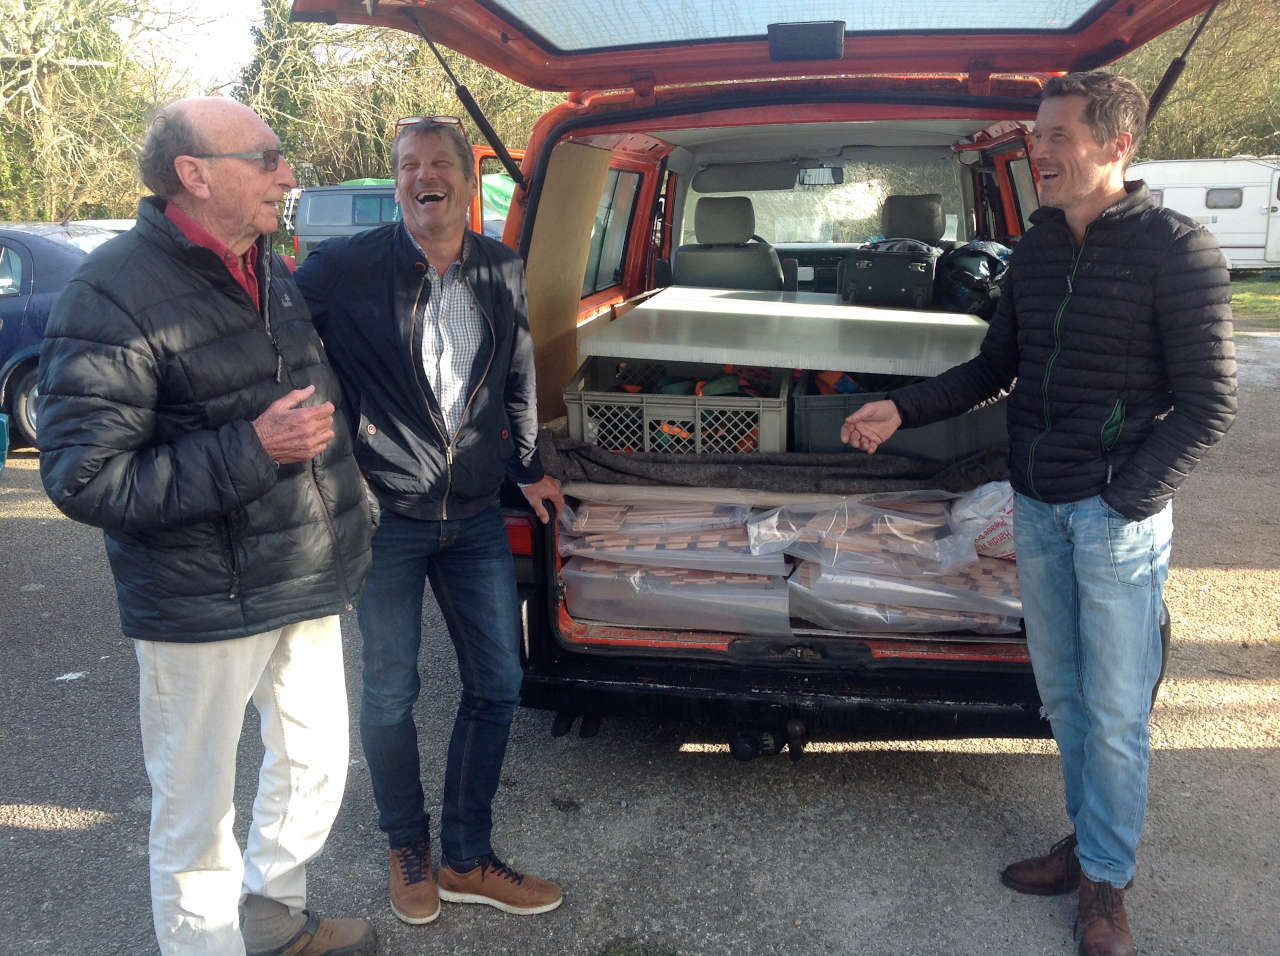 Three men stood at the back of an open van with plywood parts inside